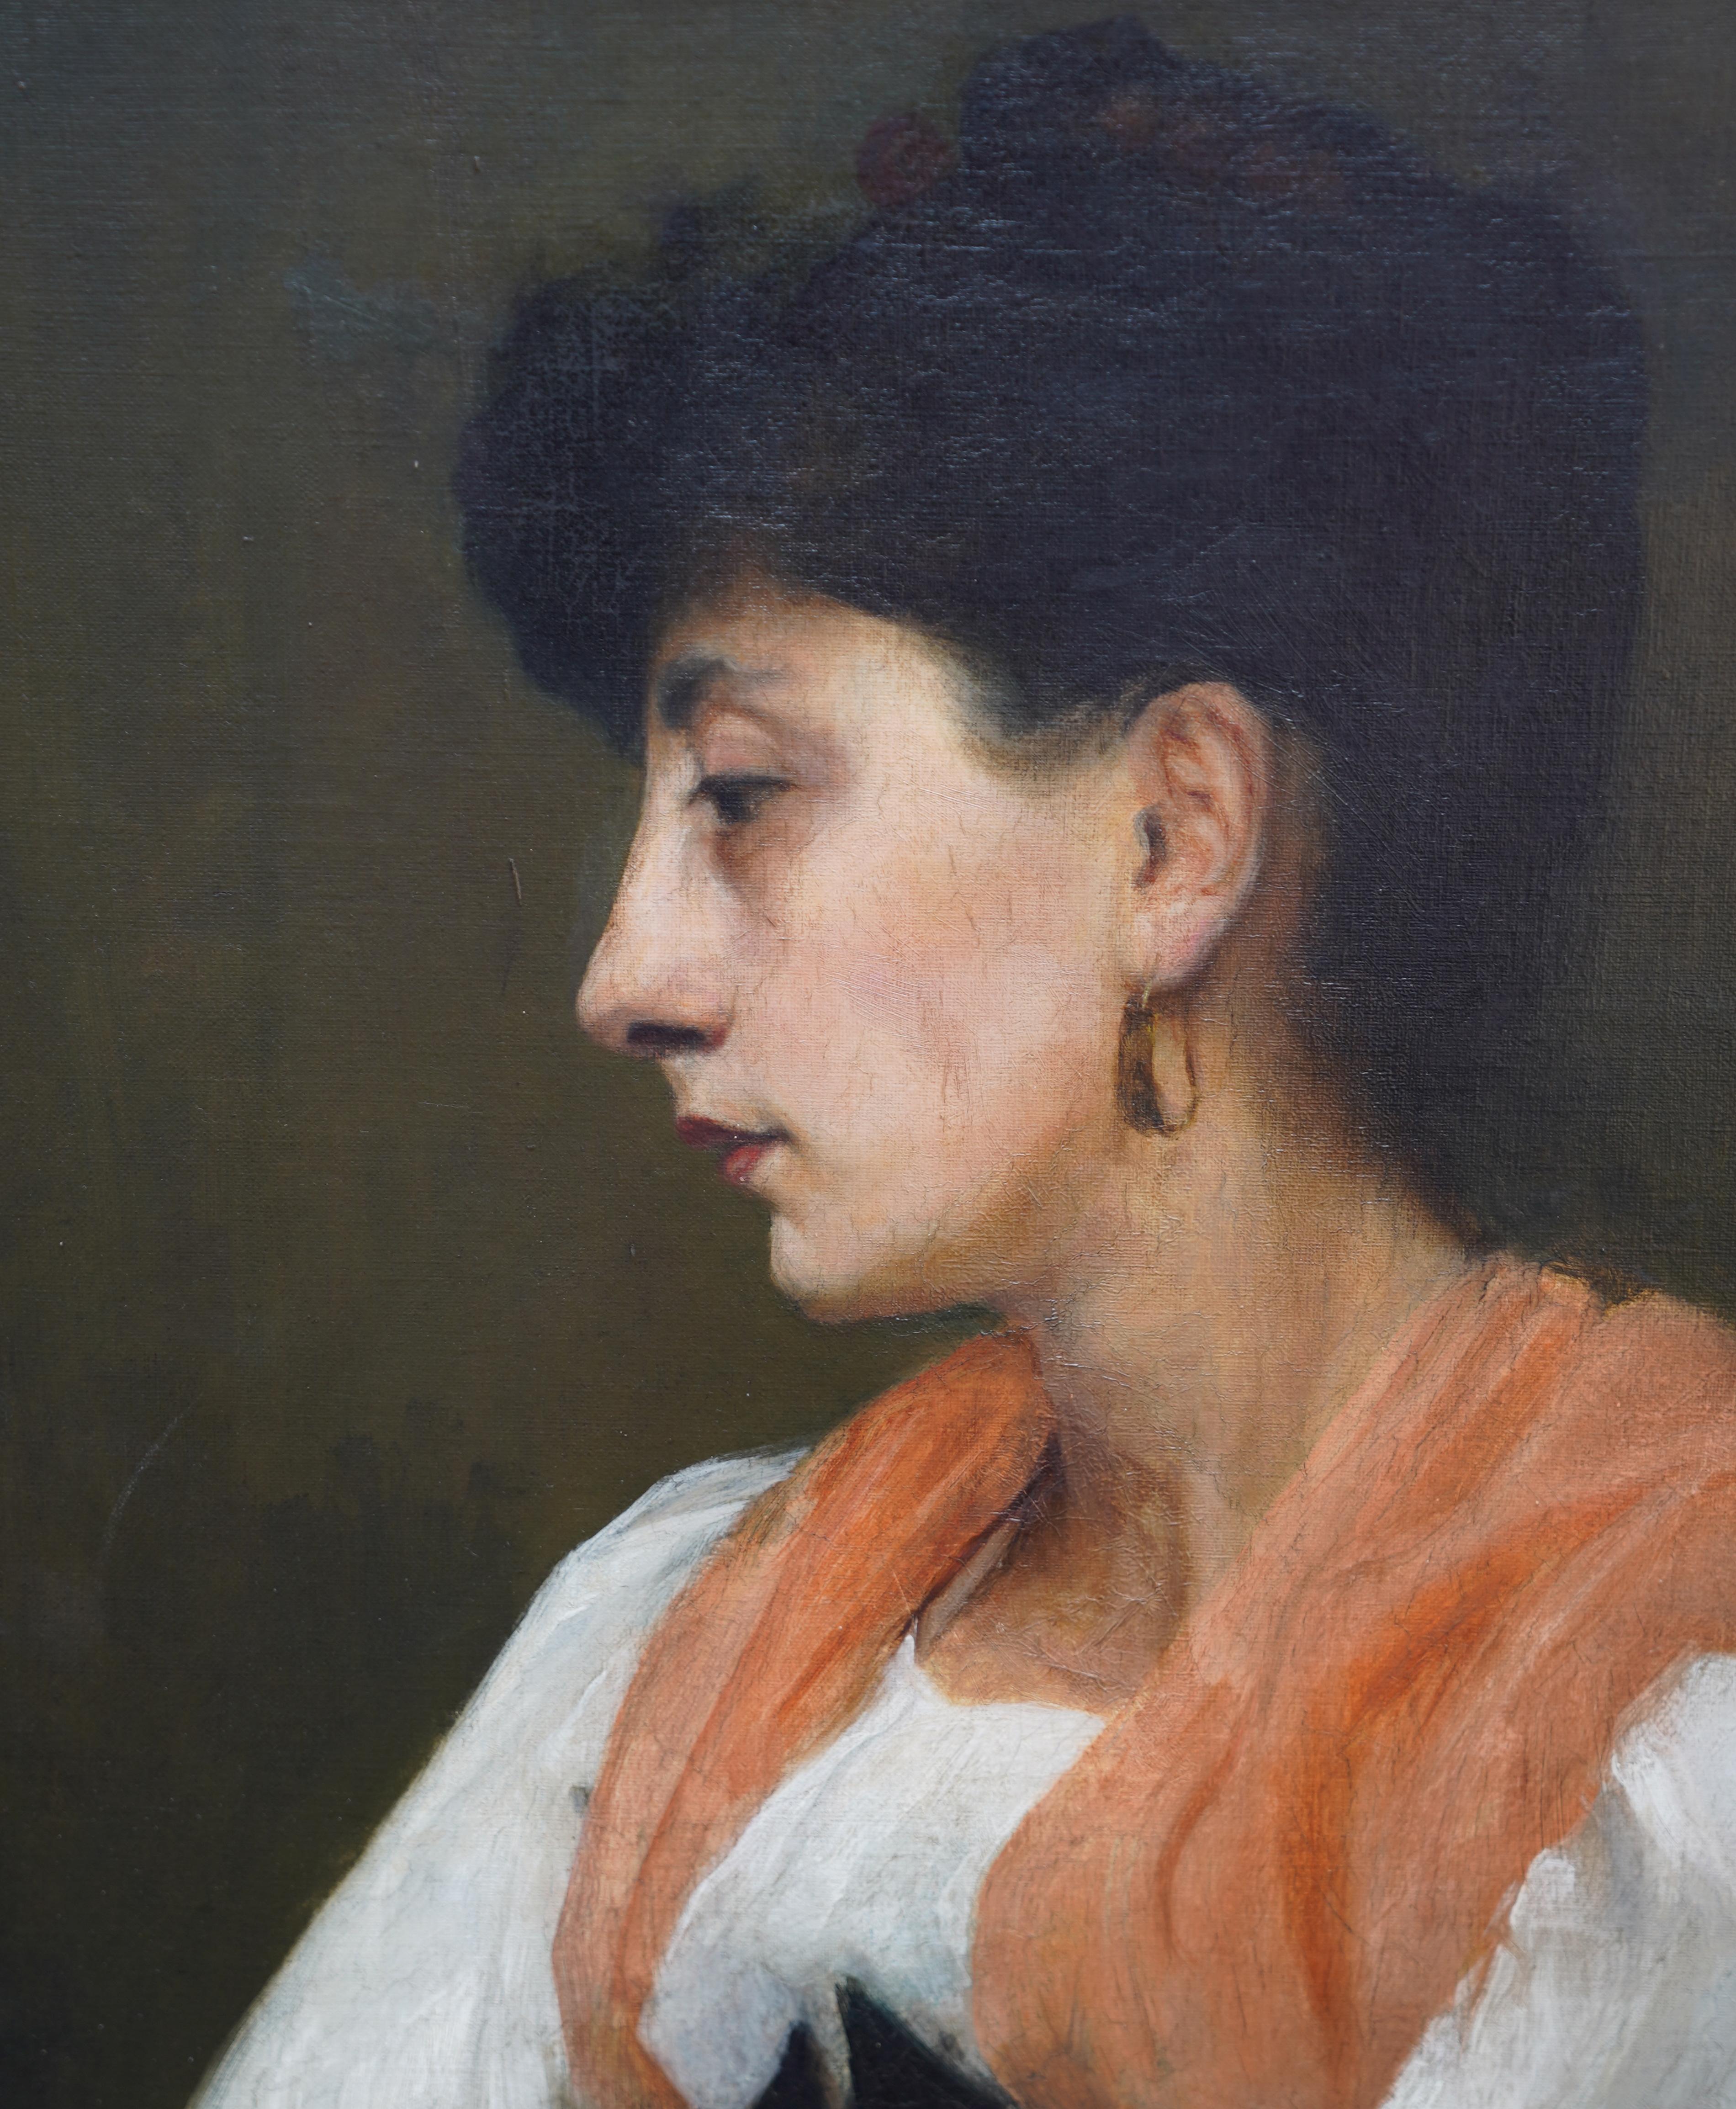 This lovely British Edwardian portrait oil painting is attributed to female artist Ursula Wood. Painted circa 1910 is is a half length portrait of a beautiful woman in an orange shawl and white blouse. The brush work and detail are stunning. A